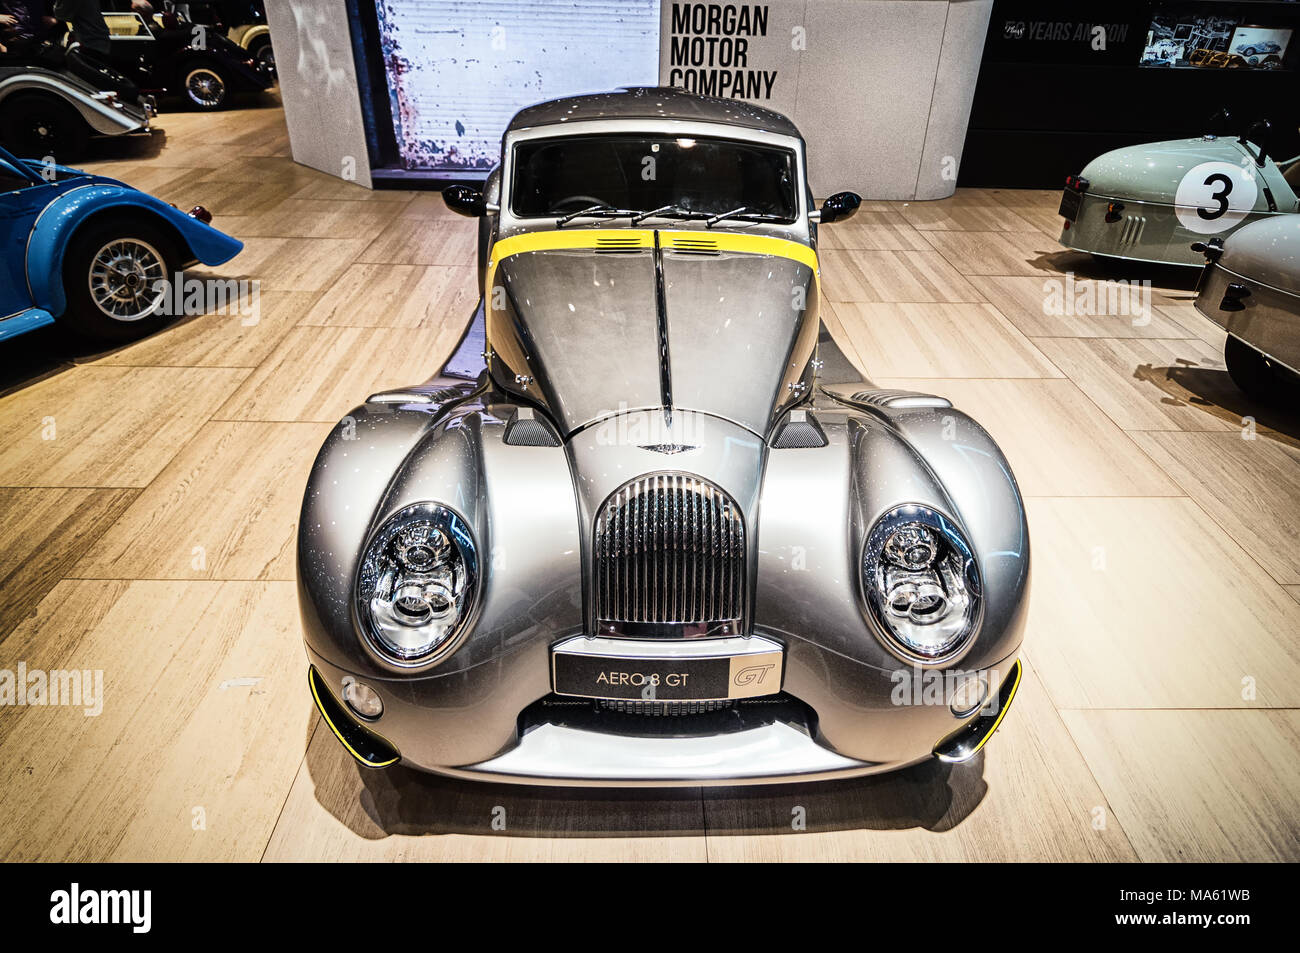 Switzerland Automotive Morgan High Resolution Stock Photography and Images  - Alamy